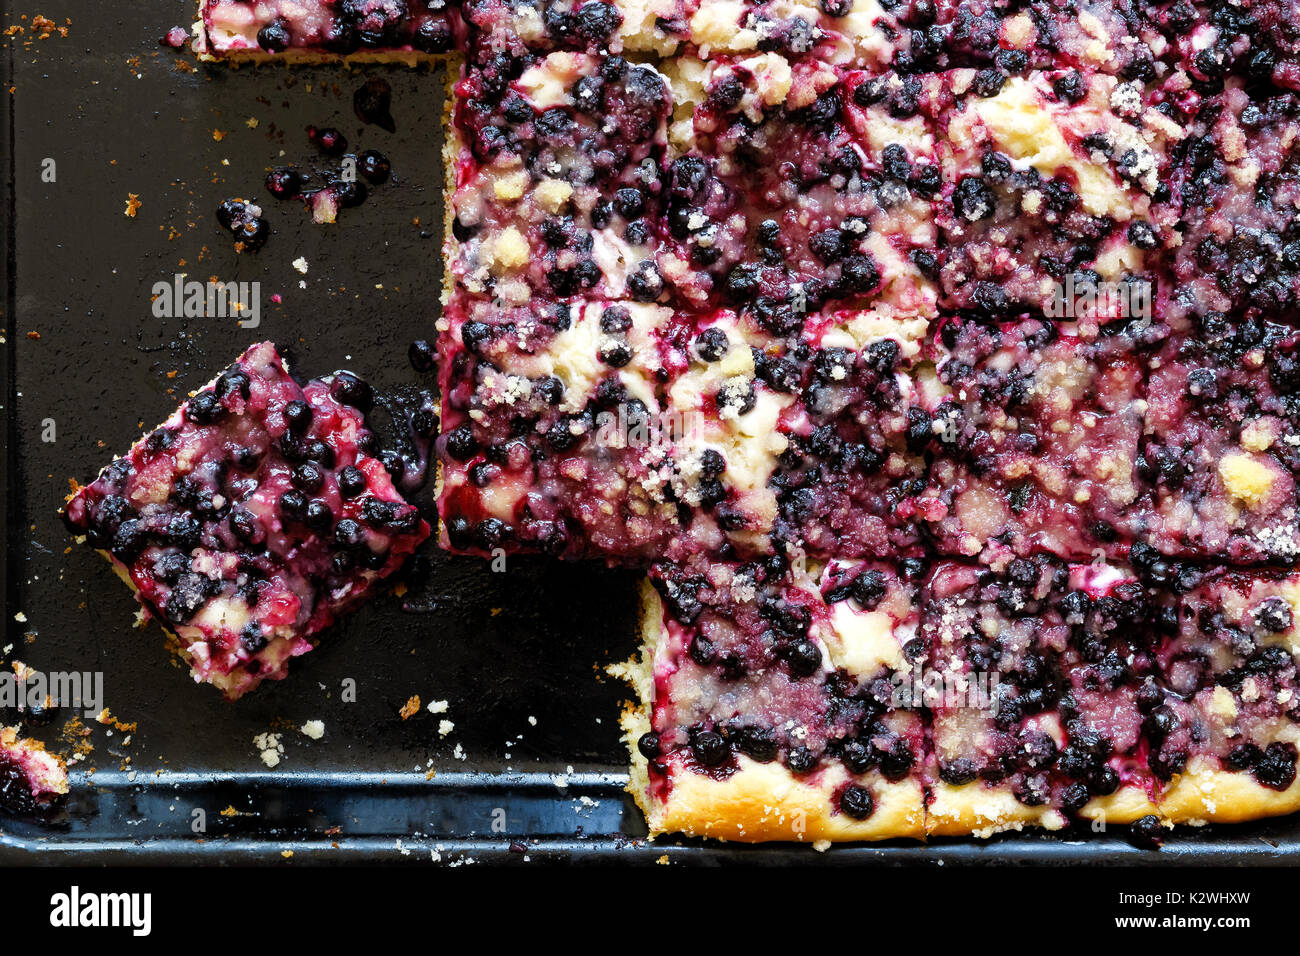 Homemade fruit and curd cheese kolach on baking tray from above. Stock Photo